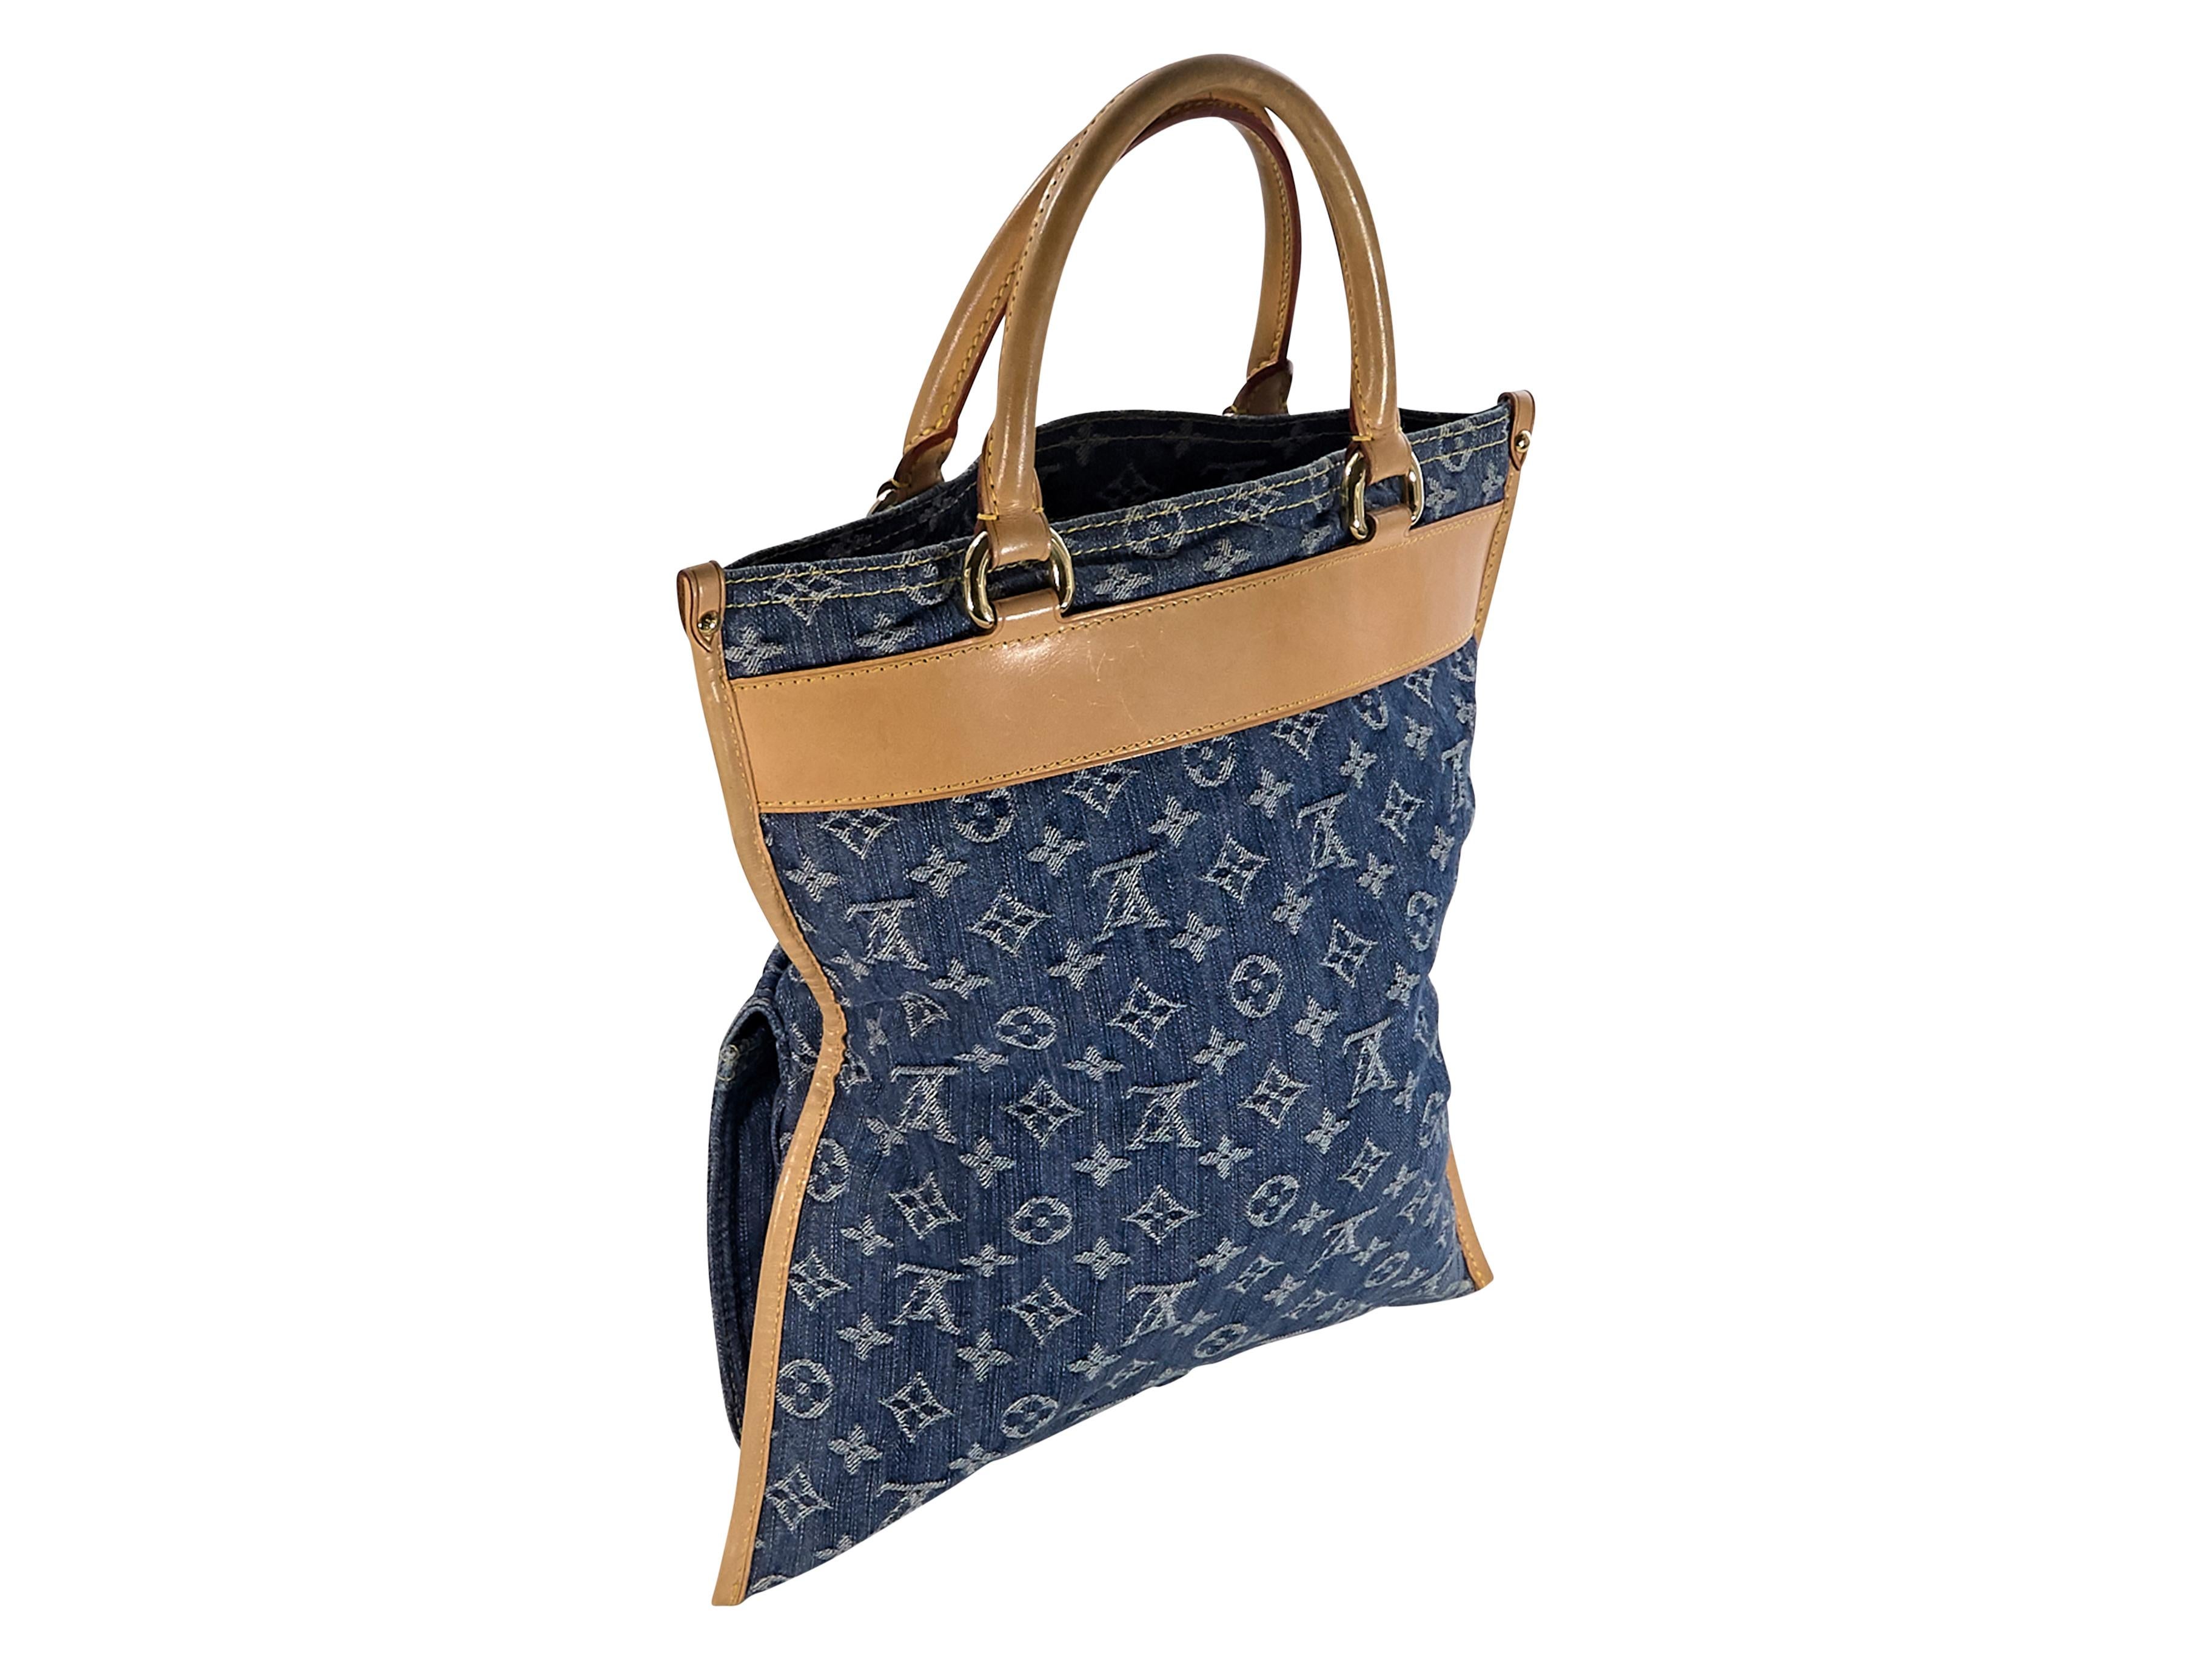 Product details:  Blue denim Sac Plat monogram tote bag by Louis Vuitton.  Trimmed with tan leather.  Dual carry handles.  Open top.  Lined interior with inner slide pocket.  Exterior zip and clasp flap pockets.  Goldtone hardware.  13 